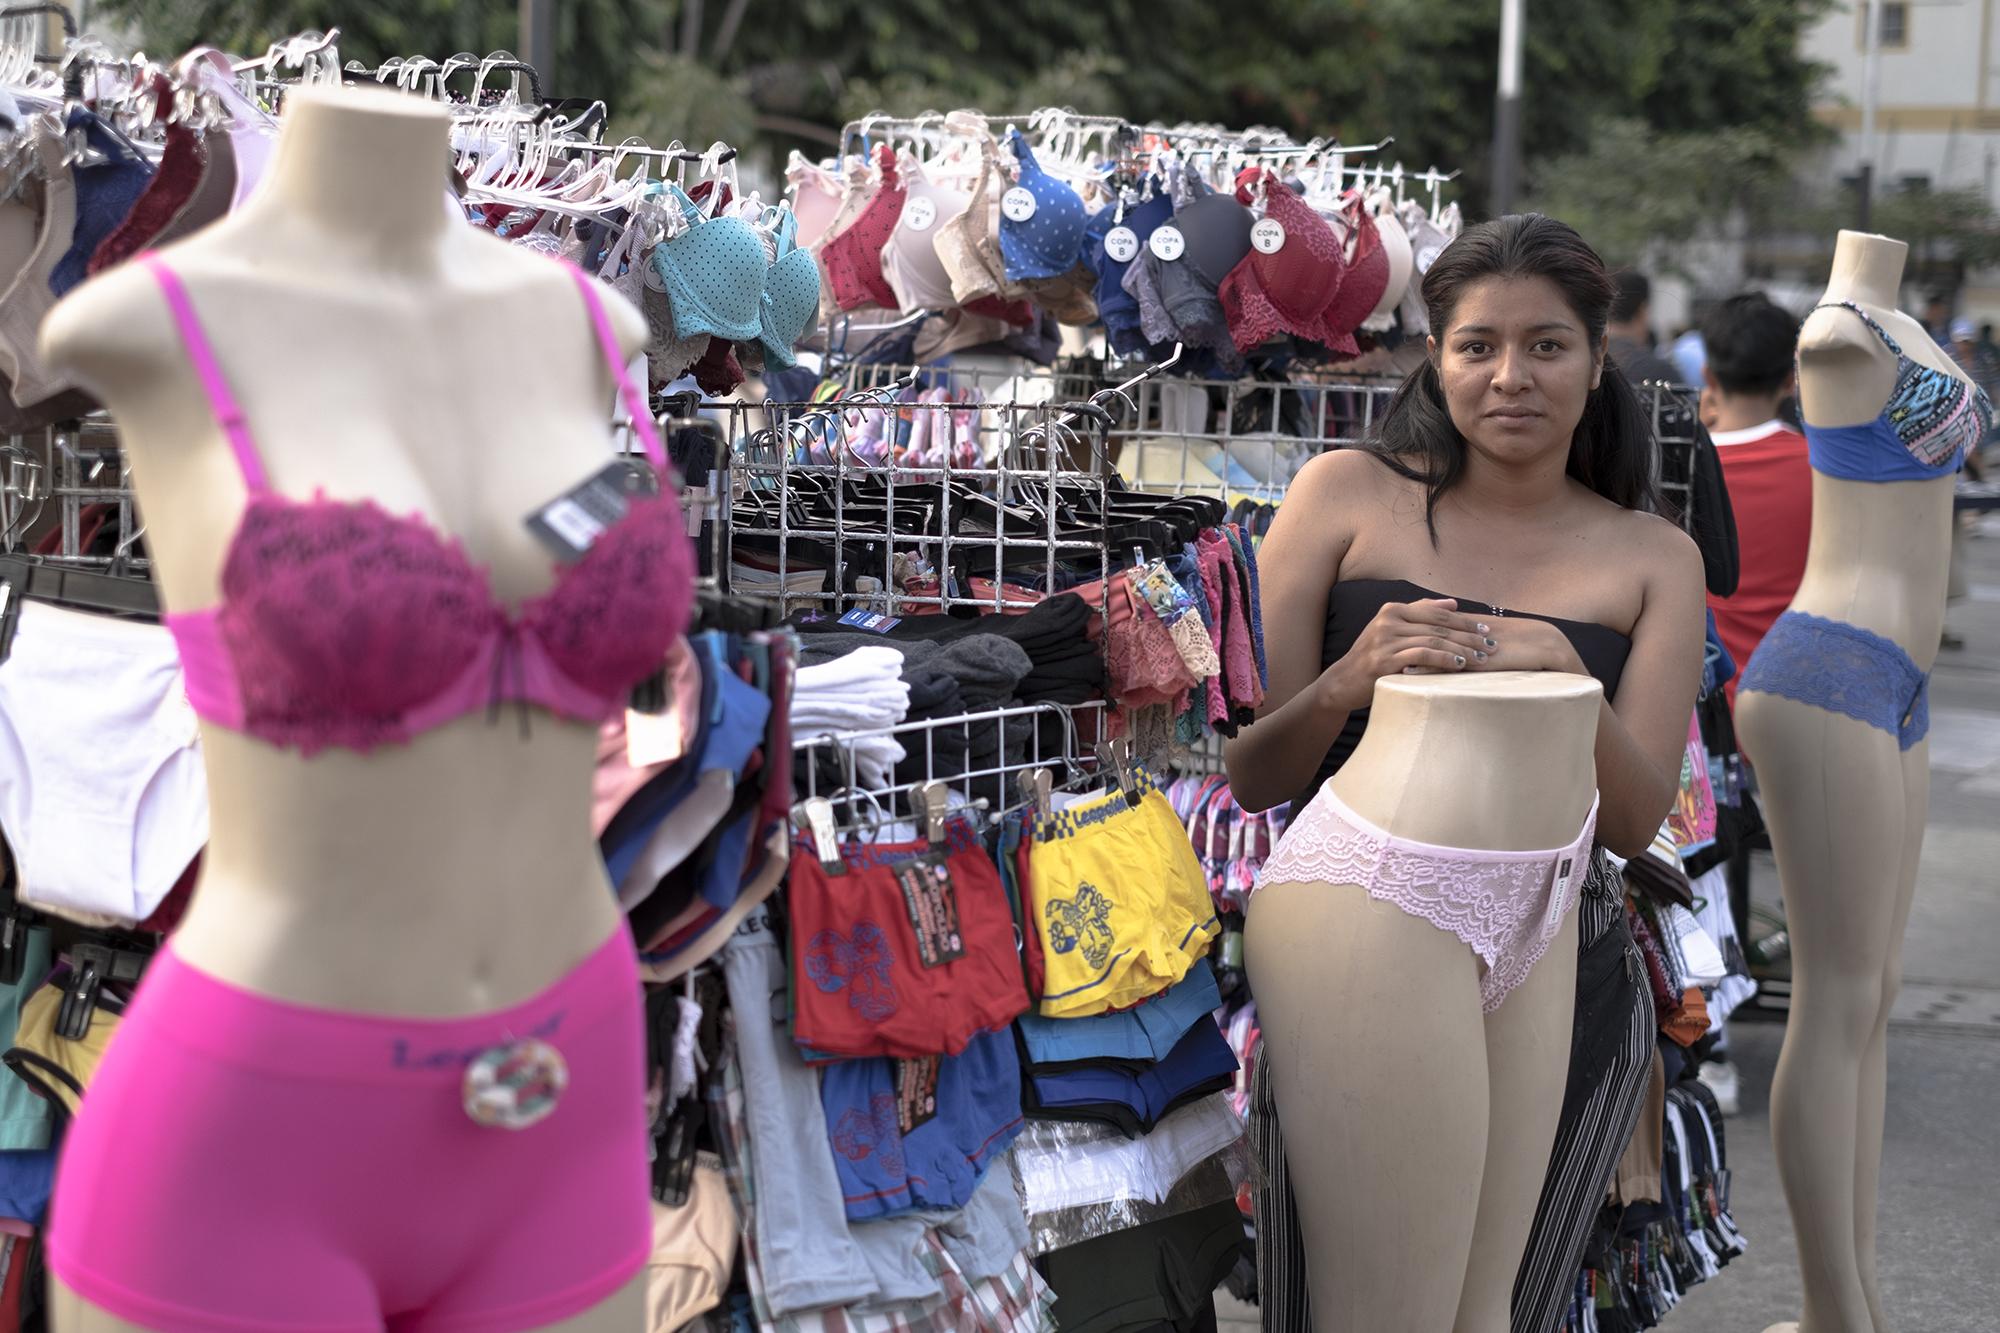 Tatiana Crespín, 24, travels from her home in San Bartolo, Ilopango to sell lingerie at Gerardo Barrios Plaza in San Salvador. It’s a family business, paying for the lives of her parents, too. “My parents are over 60,” she explained. “I go out to sell and they wait for me. I worry about their health, but also about how to put food on the table. I don’t know what I’ll do if I stop selling one day and can’t help my parents.”